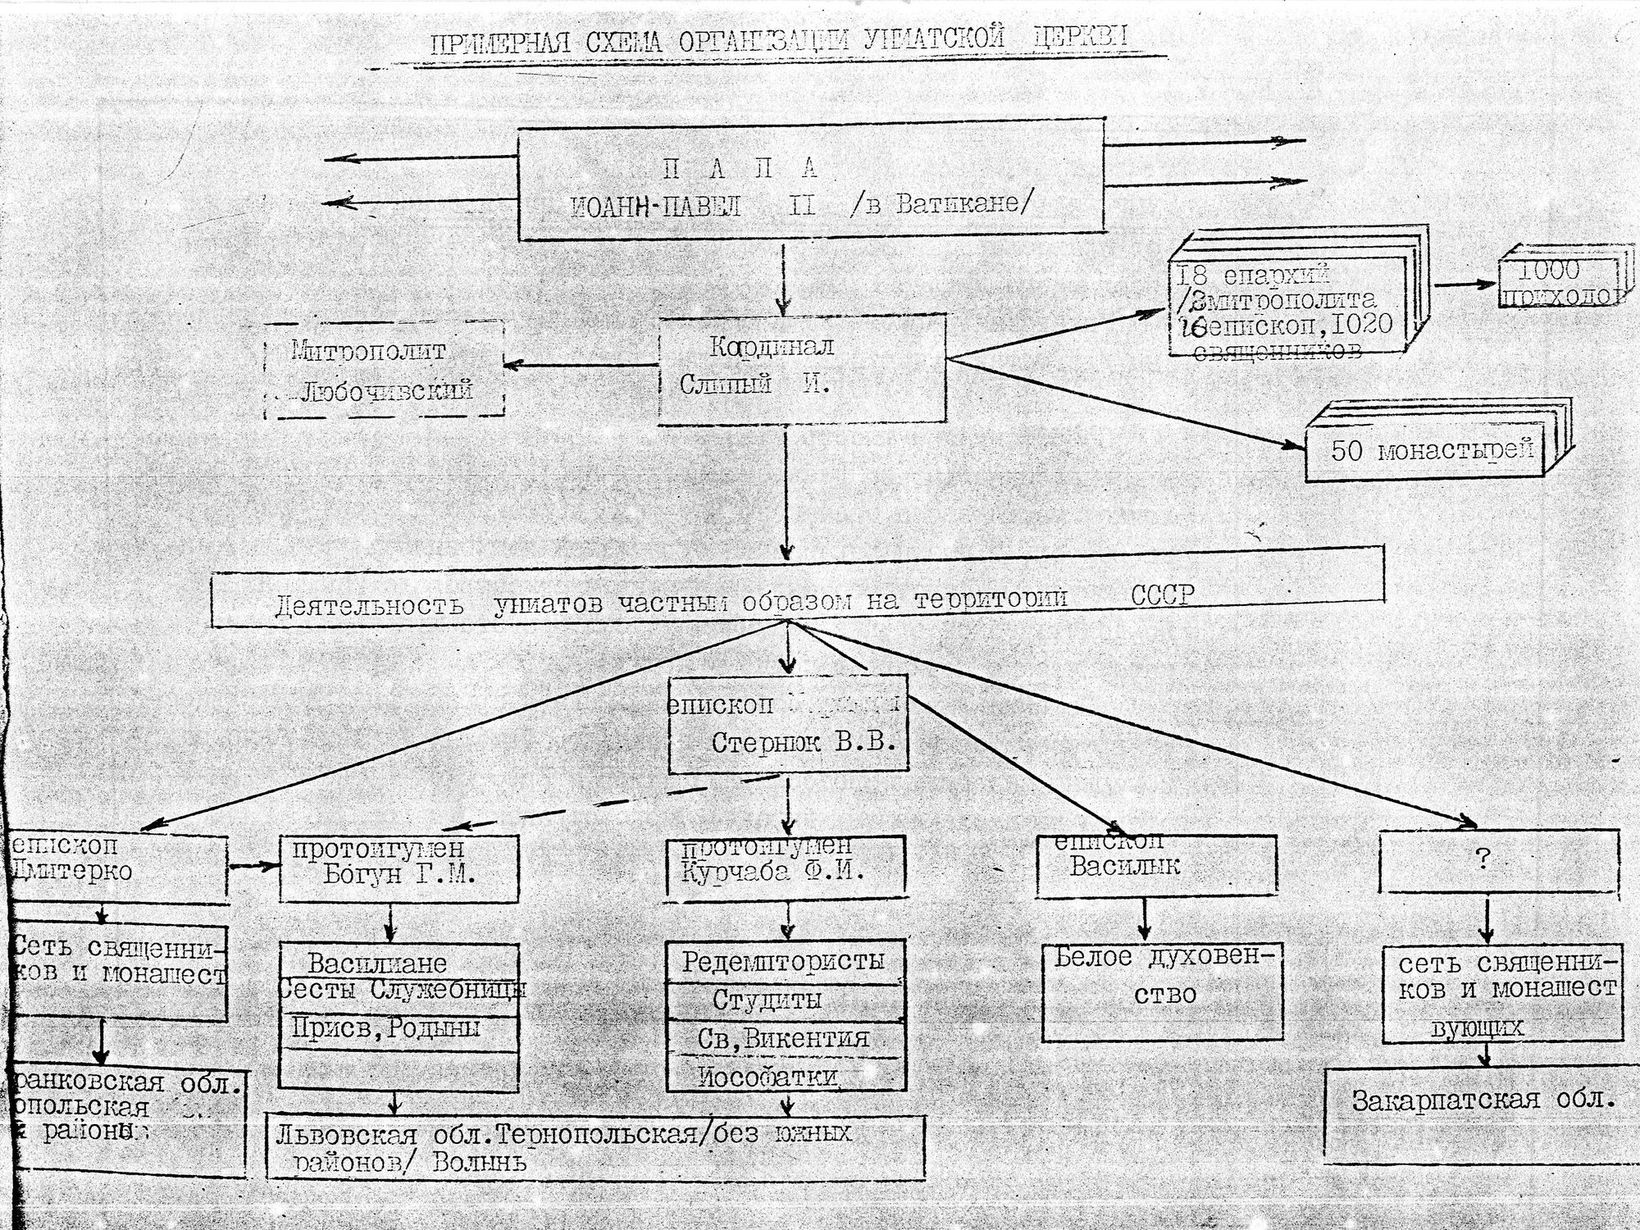 Approximate Scheme of the UGCC in the Underground. From the Materials of the Security Service of the USSR